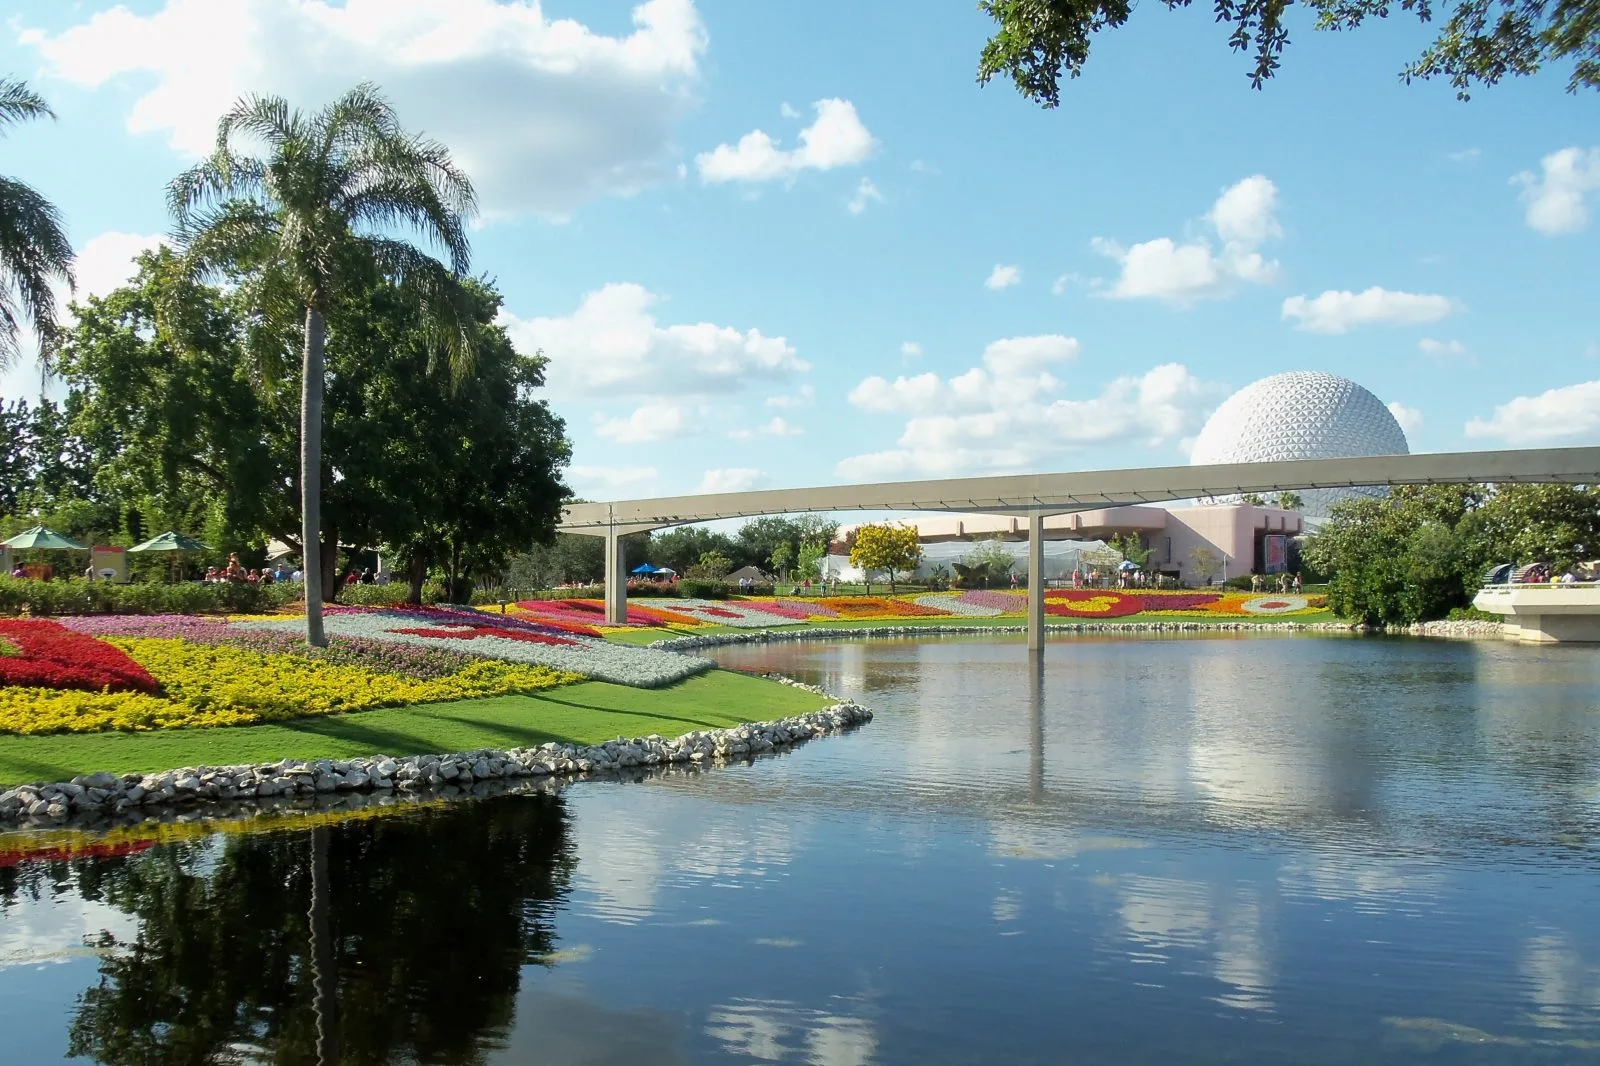 view outside of epcot, colorful flowers, water way, monorail track, and the iconic spaceship earth ride in Epcot